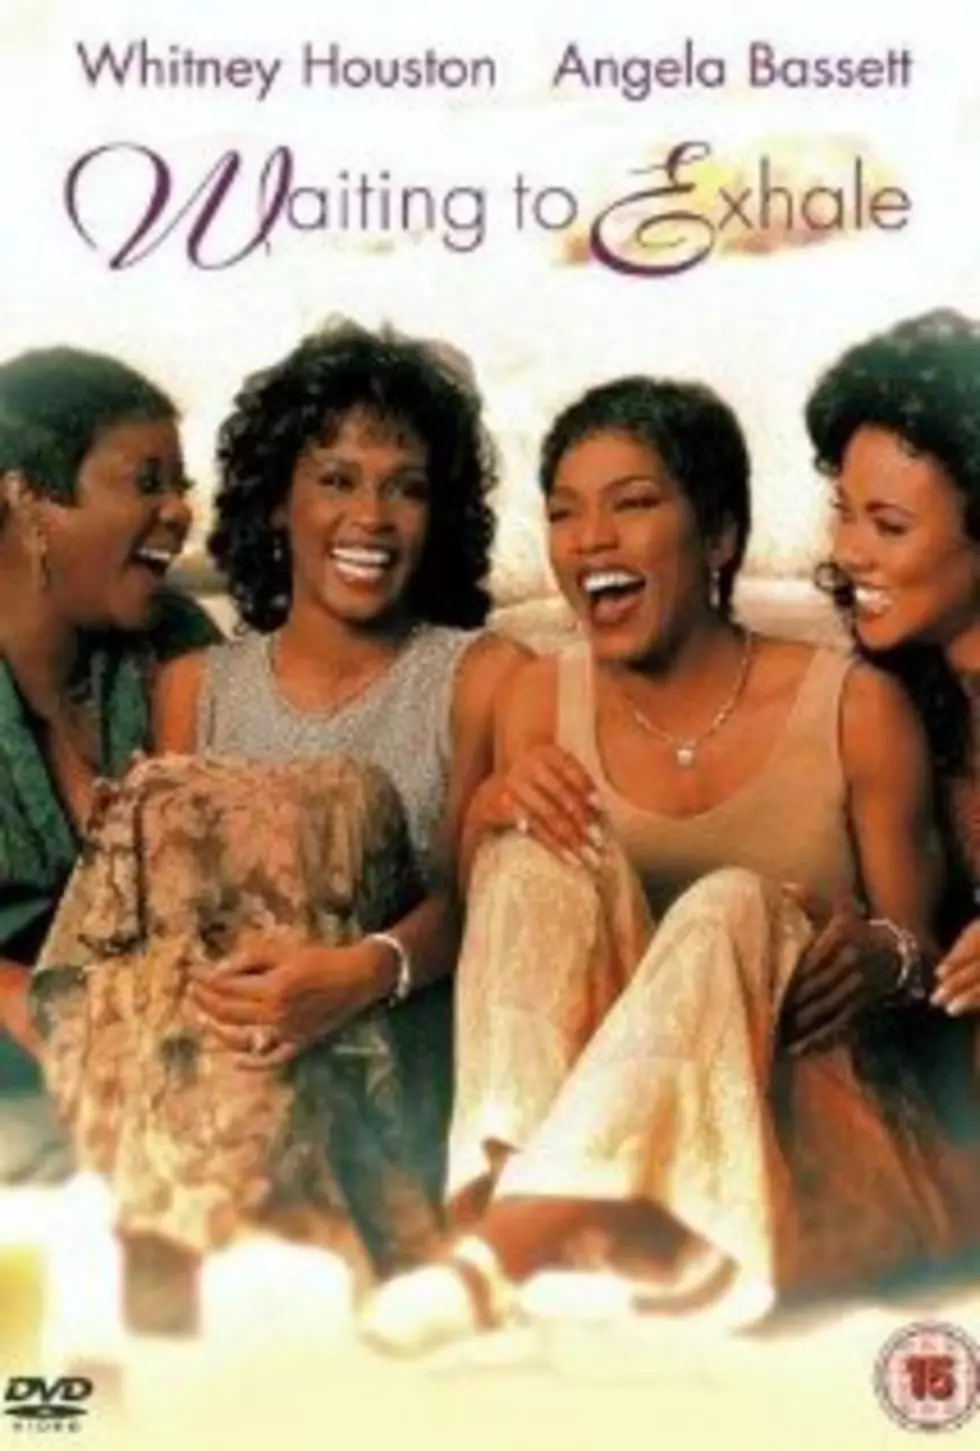 Whitney Houston To Appear in “Waiting to Exhale” Sequel